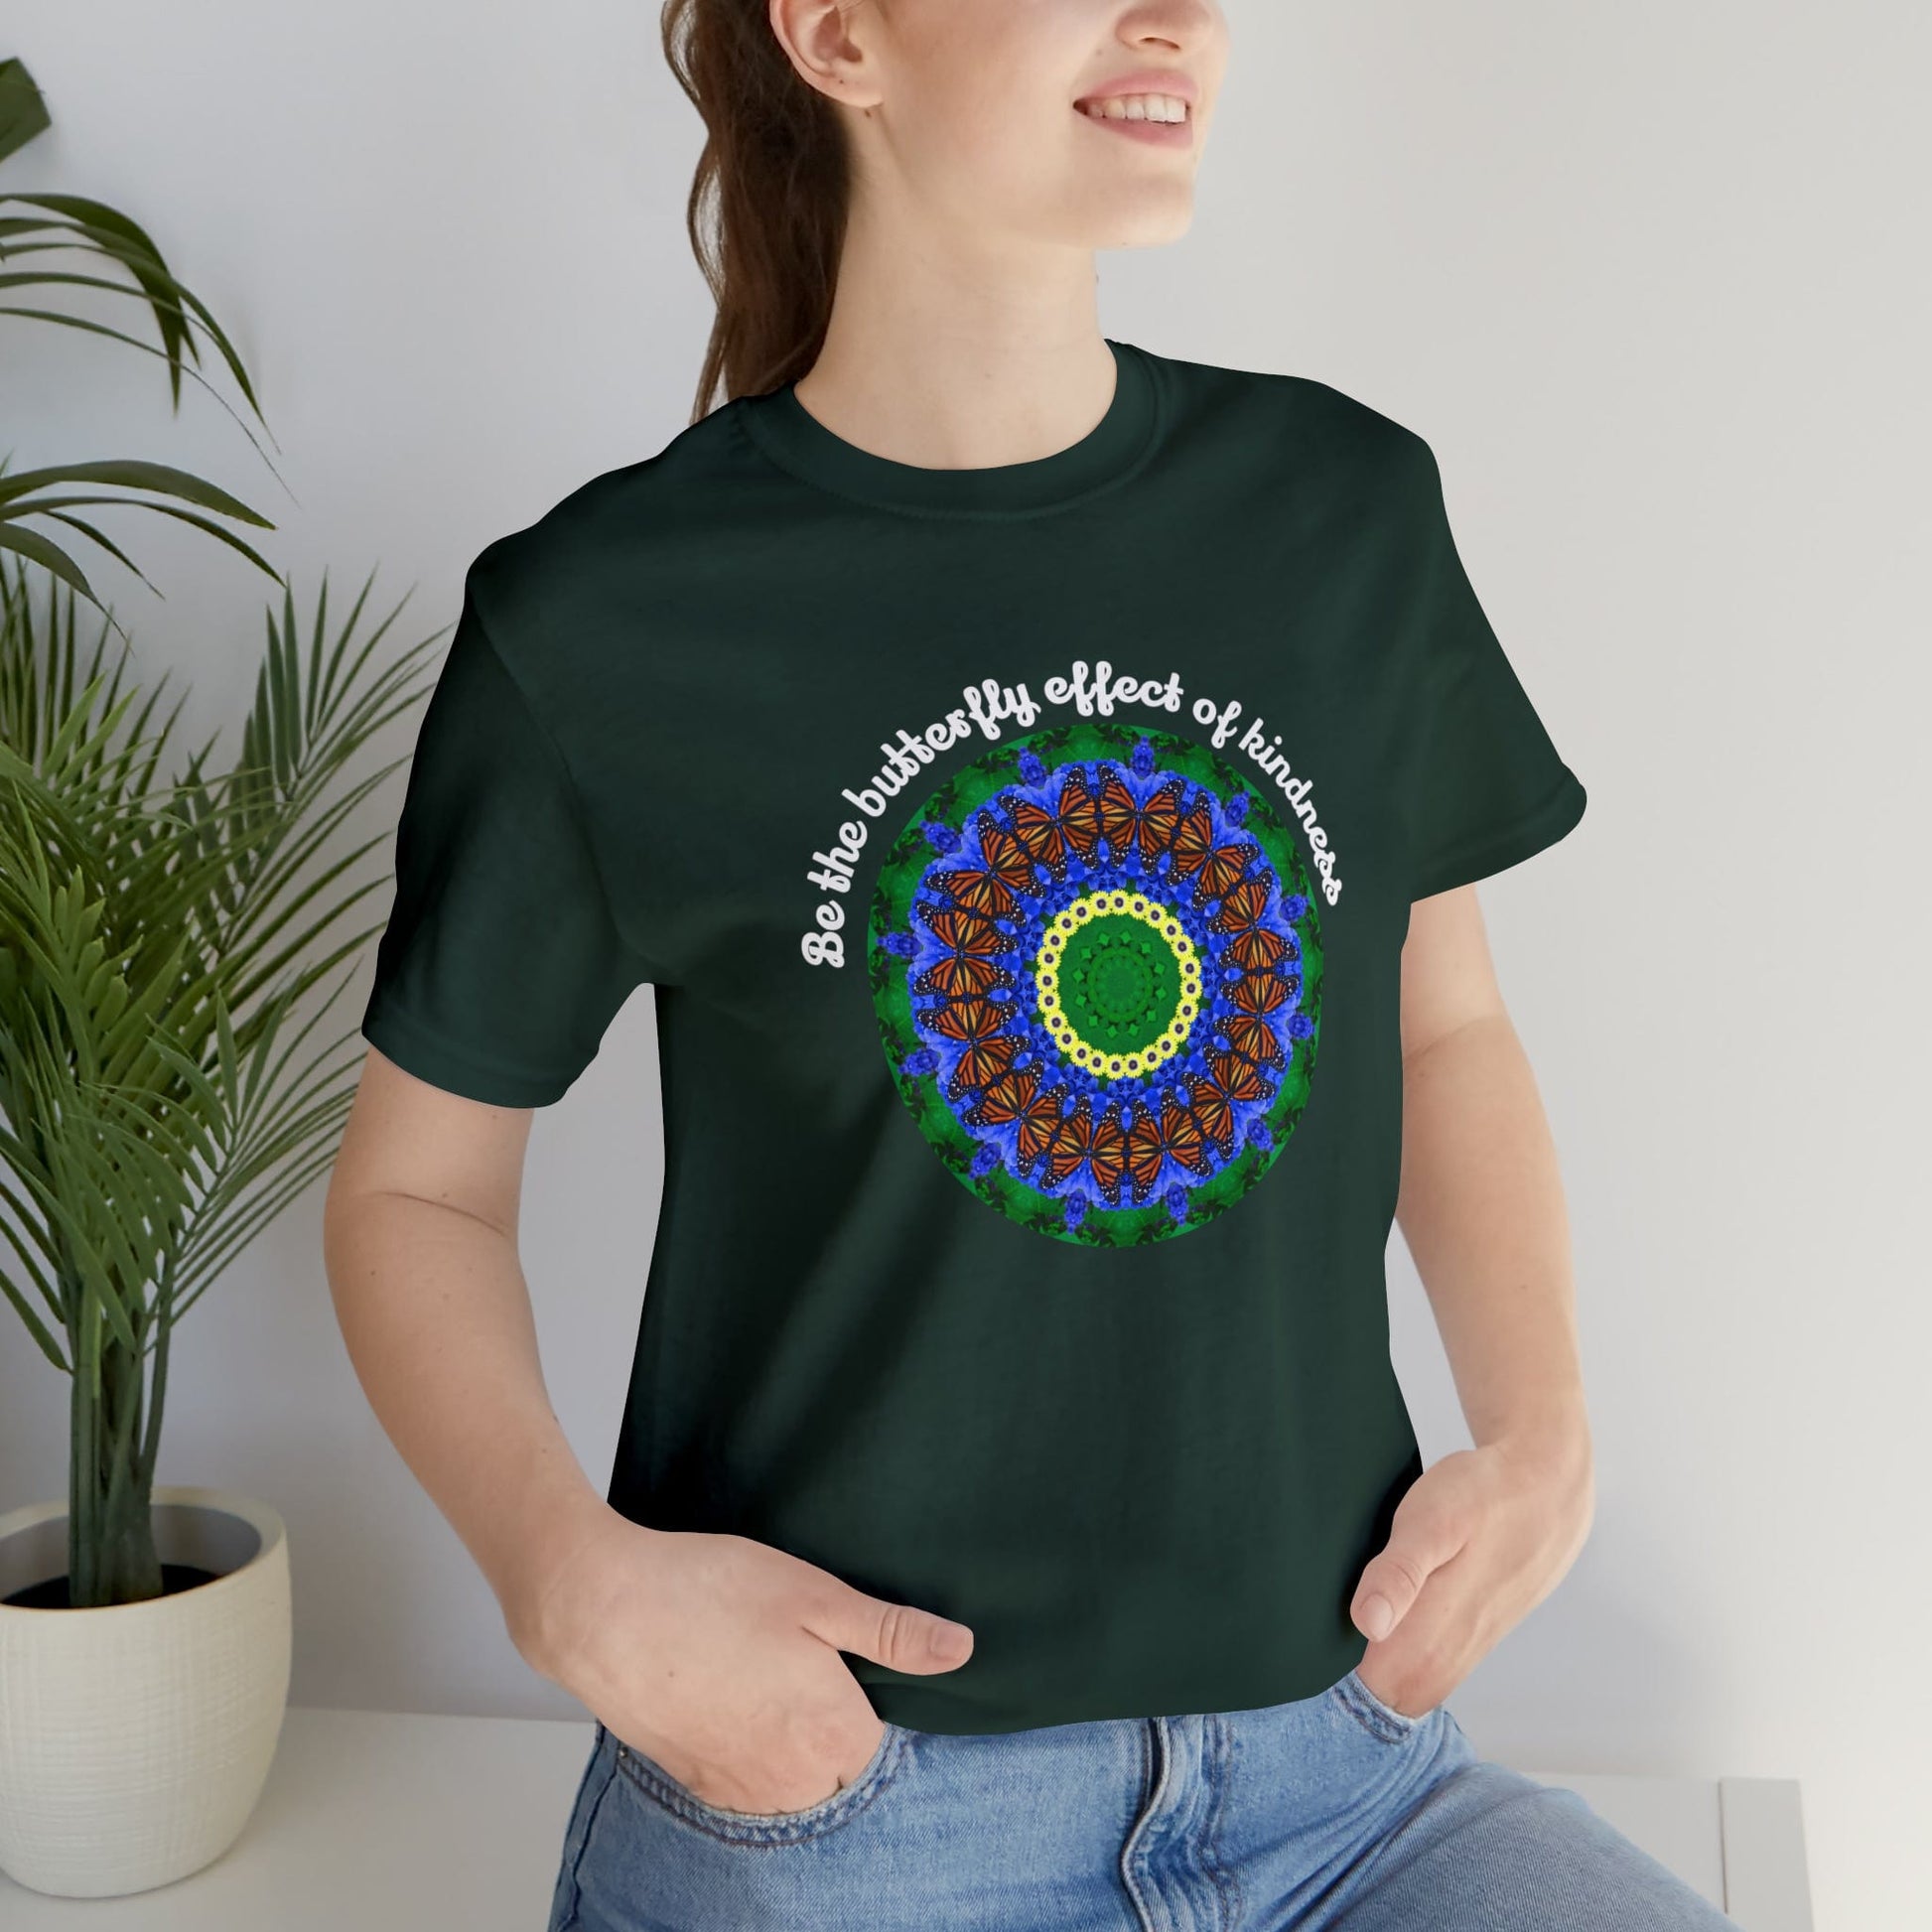 Cute Graphic Kindness Shirts  - Beautiful Monarch Butterfly Mandala Art For Positive Vibes – Butterfly Effect Forest Green